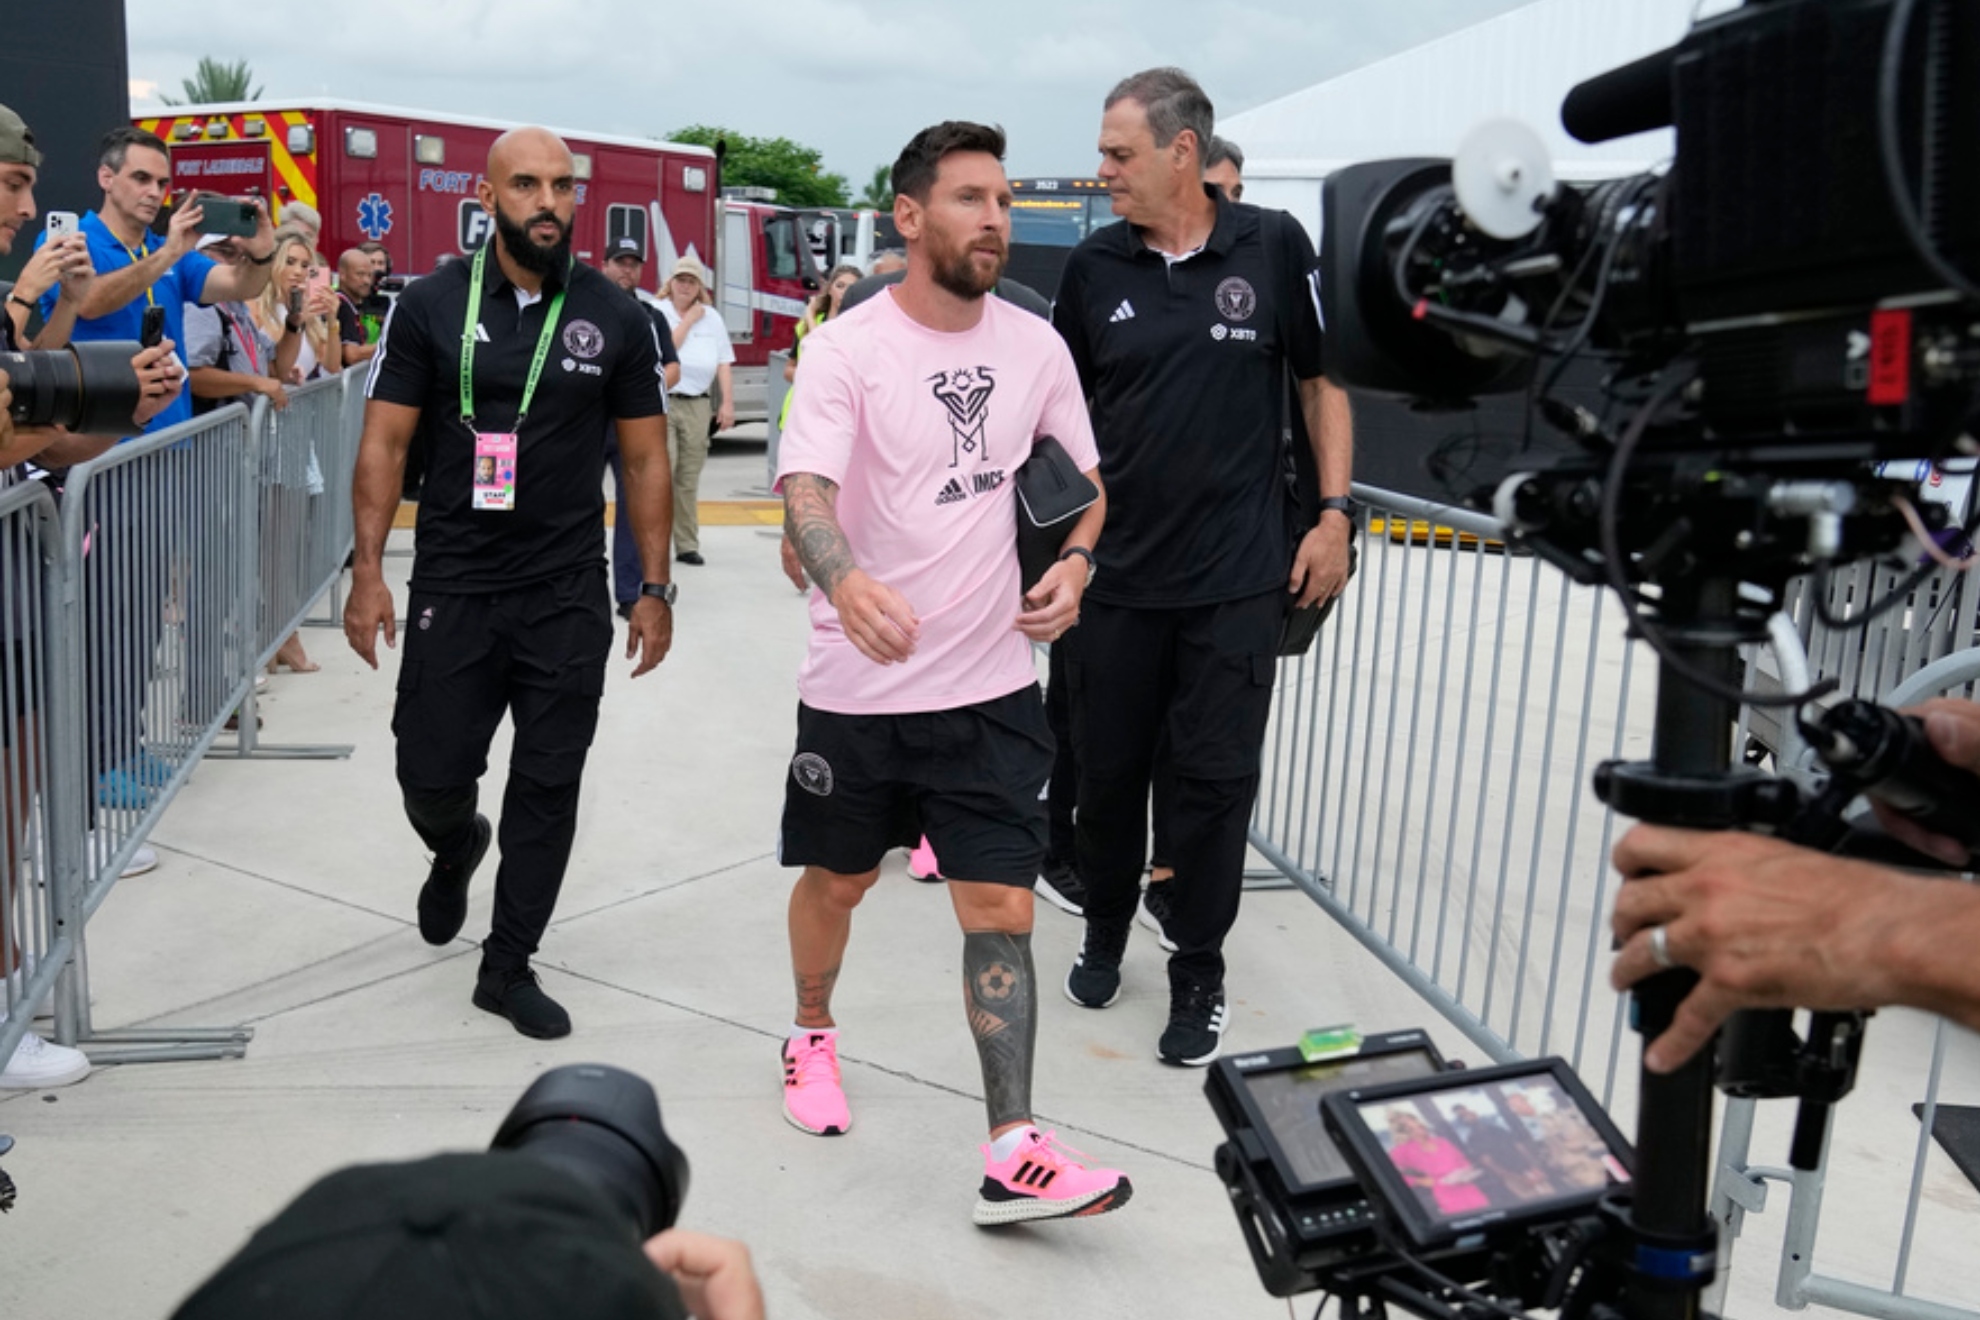 The Messi Experience begins construction as fans have already purchased thousands of tickets